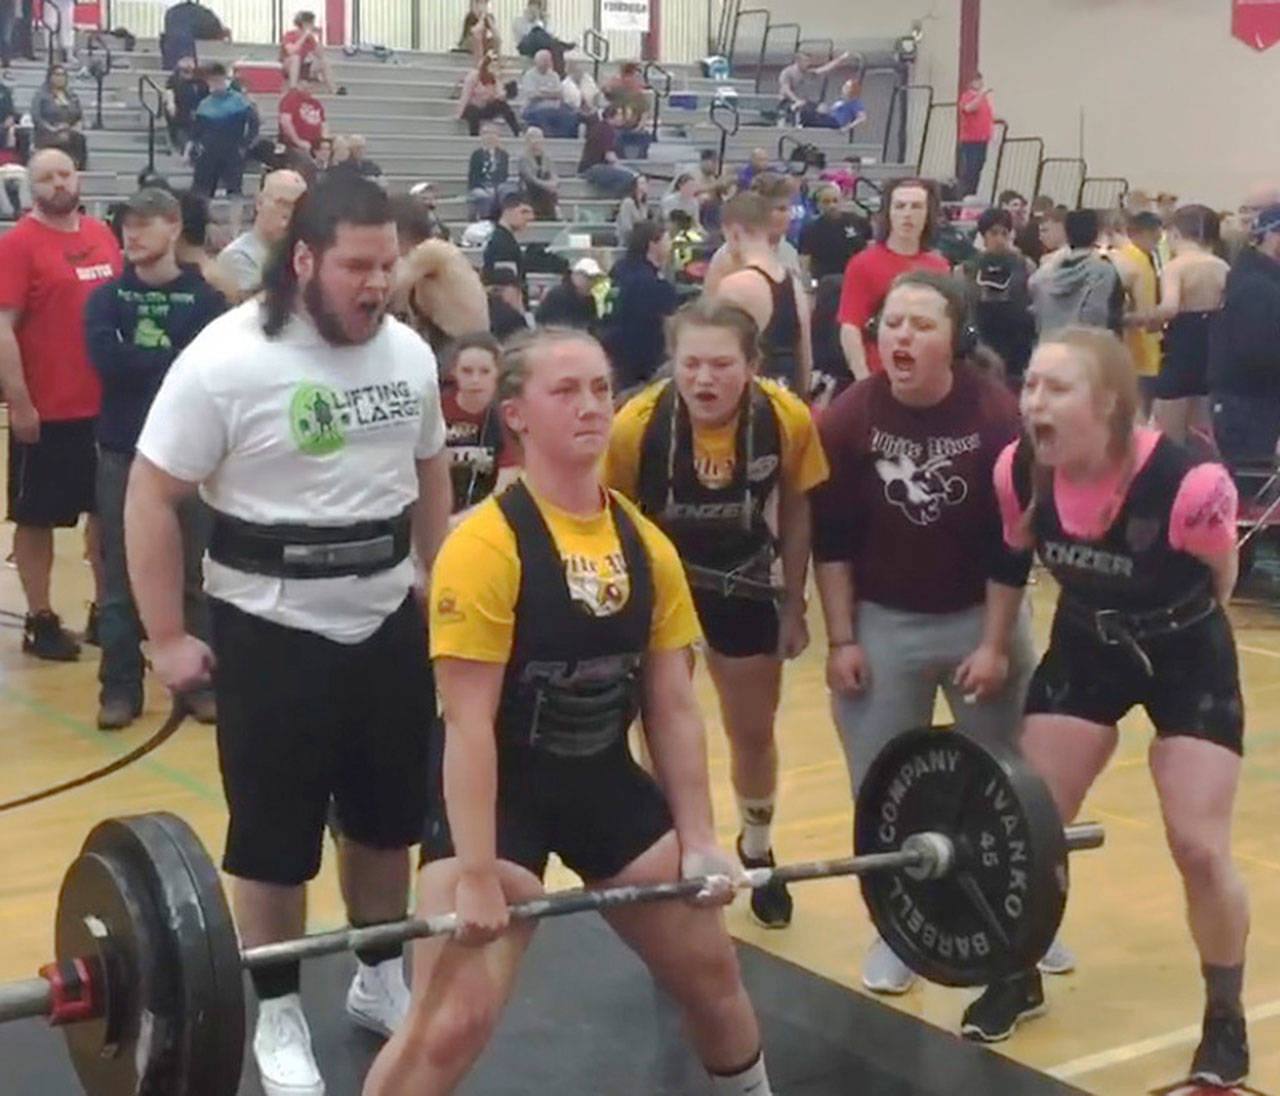 Marissa Bartels competes in the dead list for White River, successful with 305 pounds. Cheerins her on, from left, are teammate Parker Knaus, sister Marina Bartels, assistant coach Dani Barbee and Cheyenne Martin of North Beach High. Photo by Darren Bartels